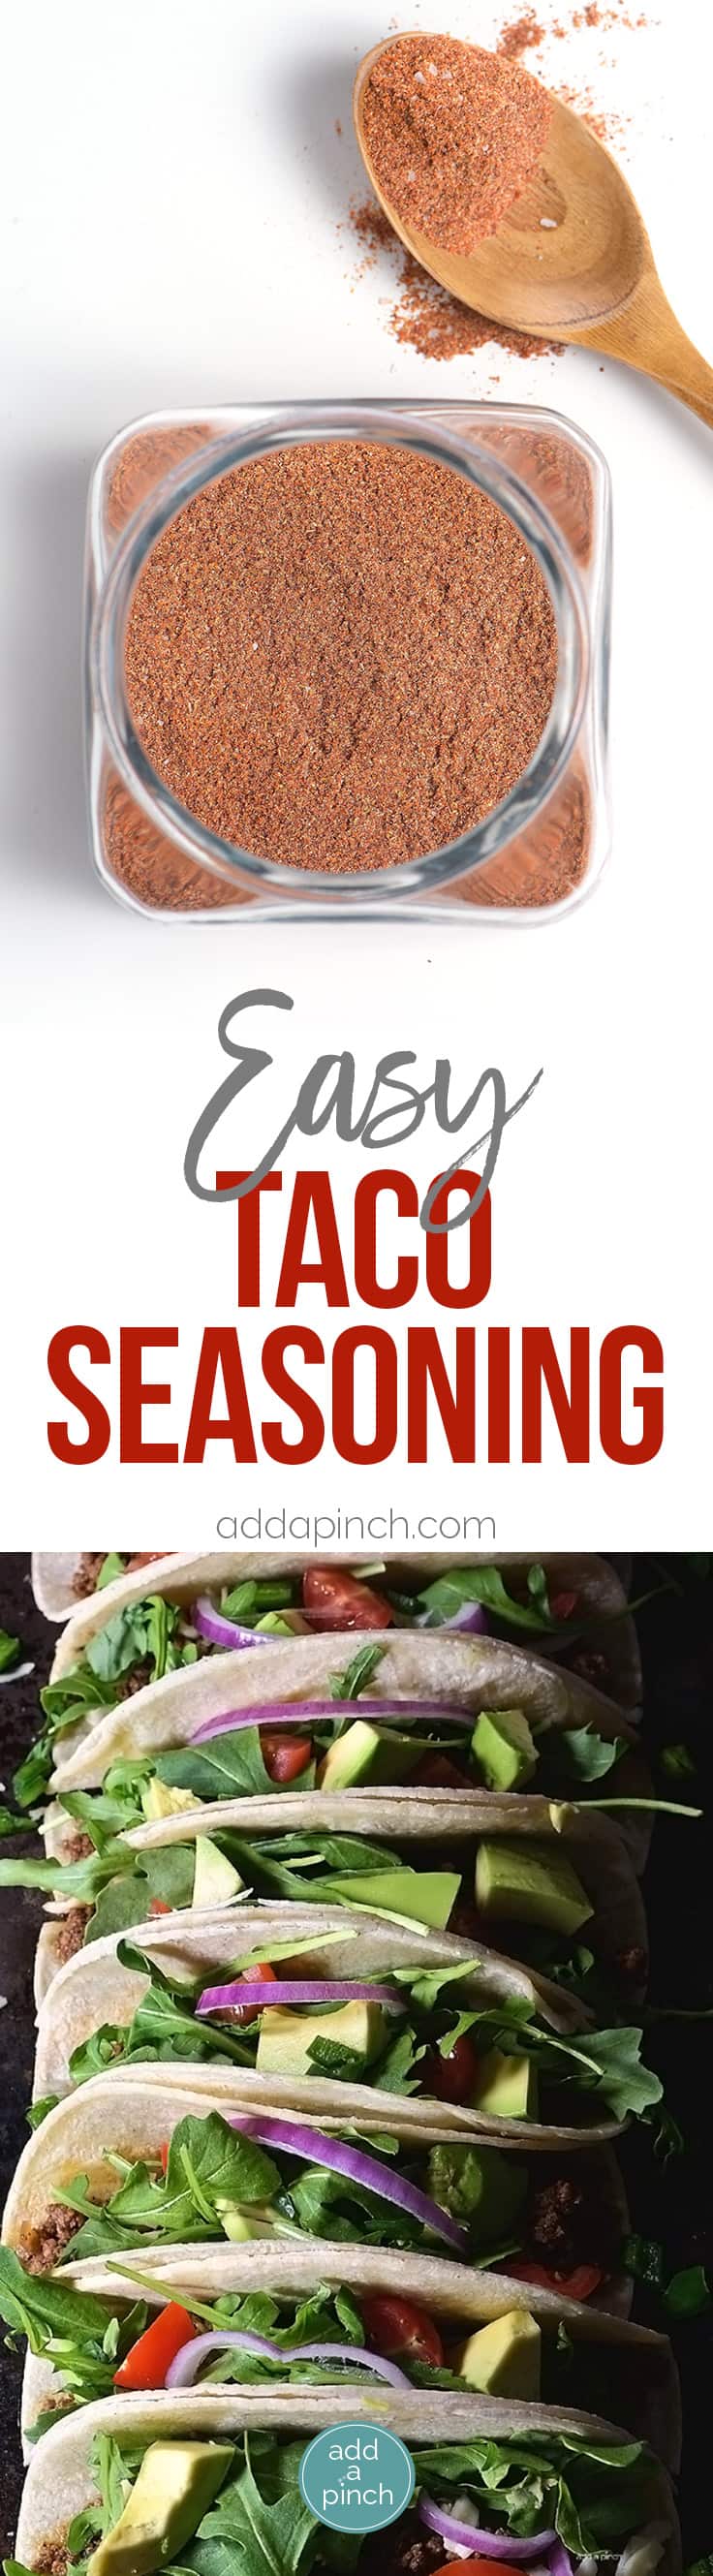 Homemade Taco Seasoning Recipe - This easy homemade taco seasoning mix is made with just five ingredients and with no preservatives! Great for tacos, fajitas, and so much more! // addapinch.com